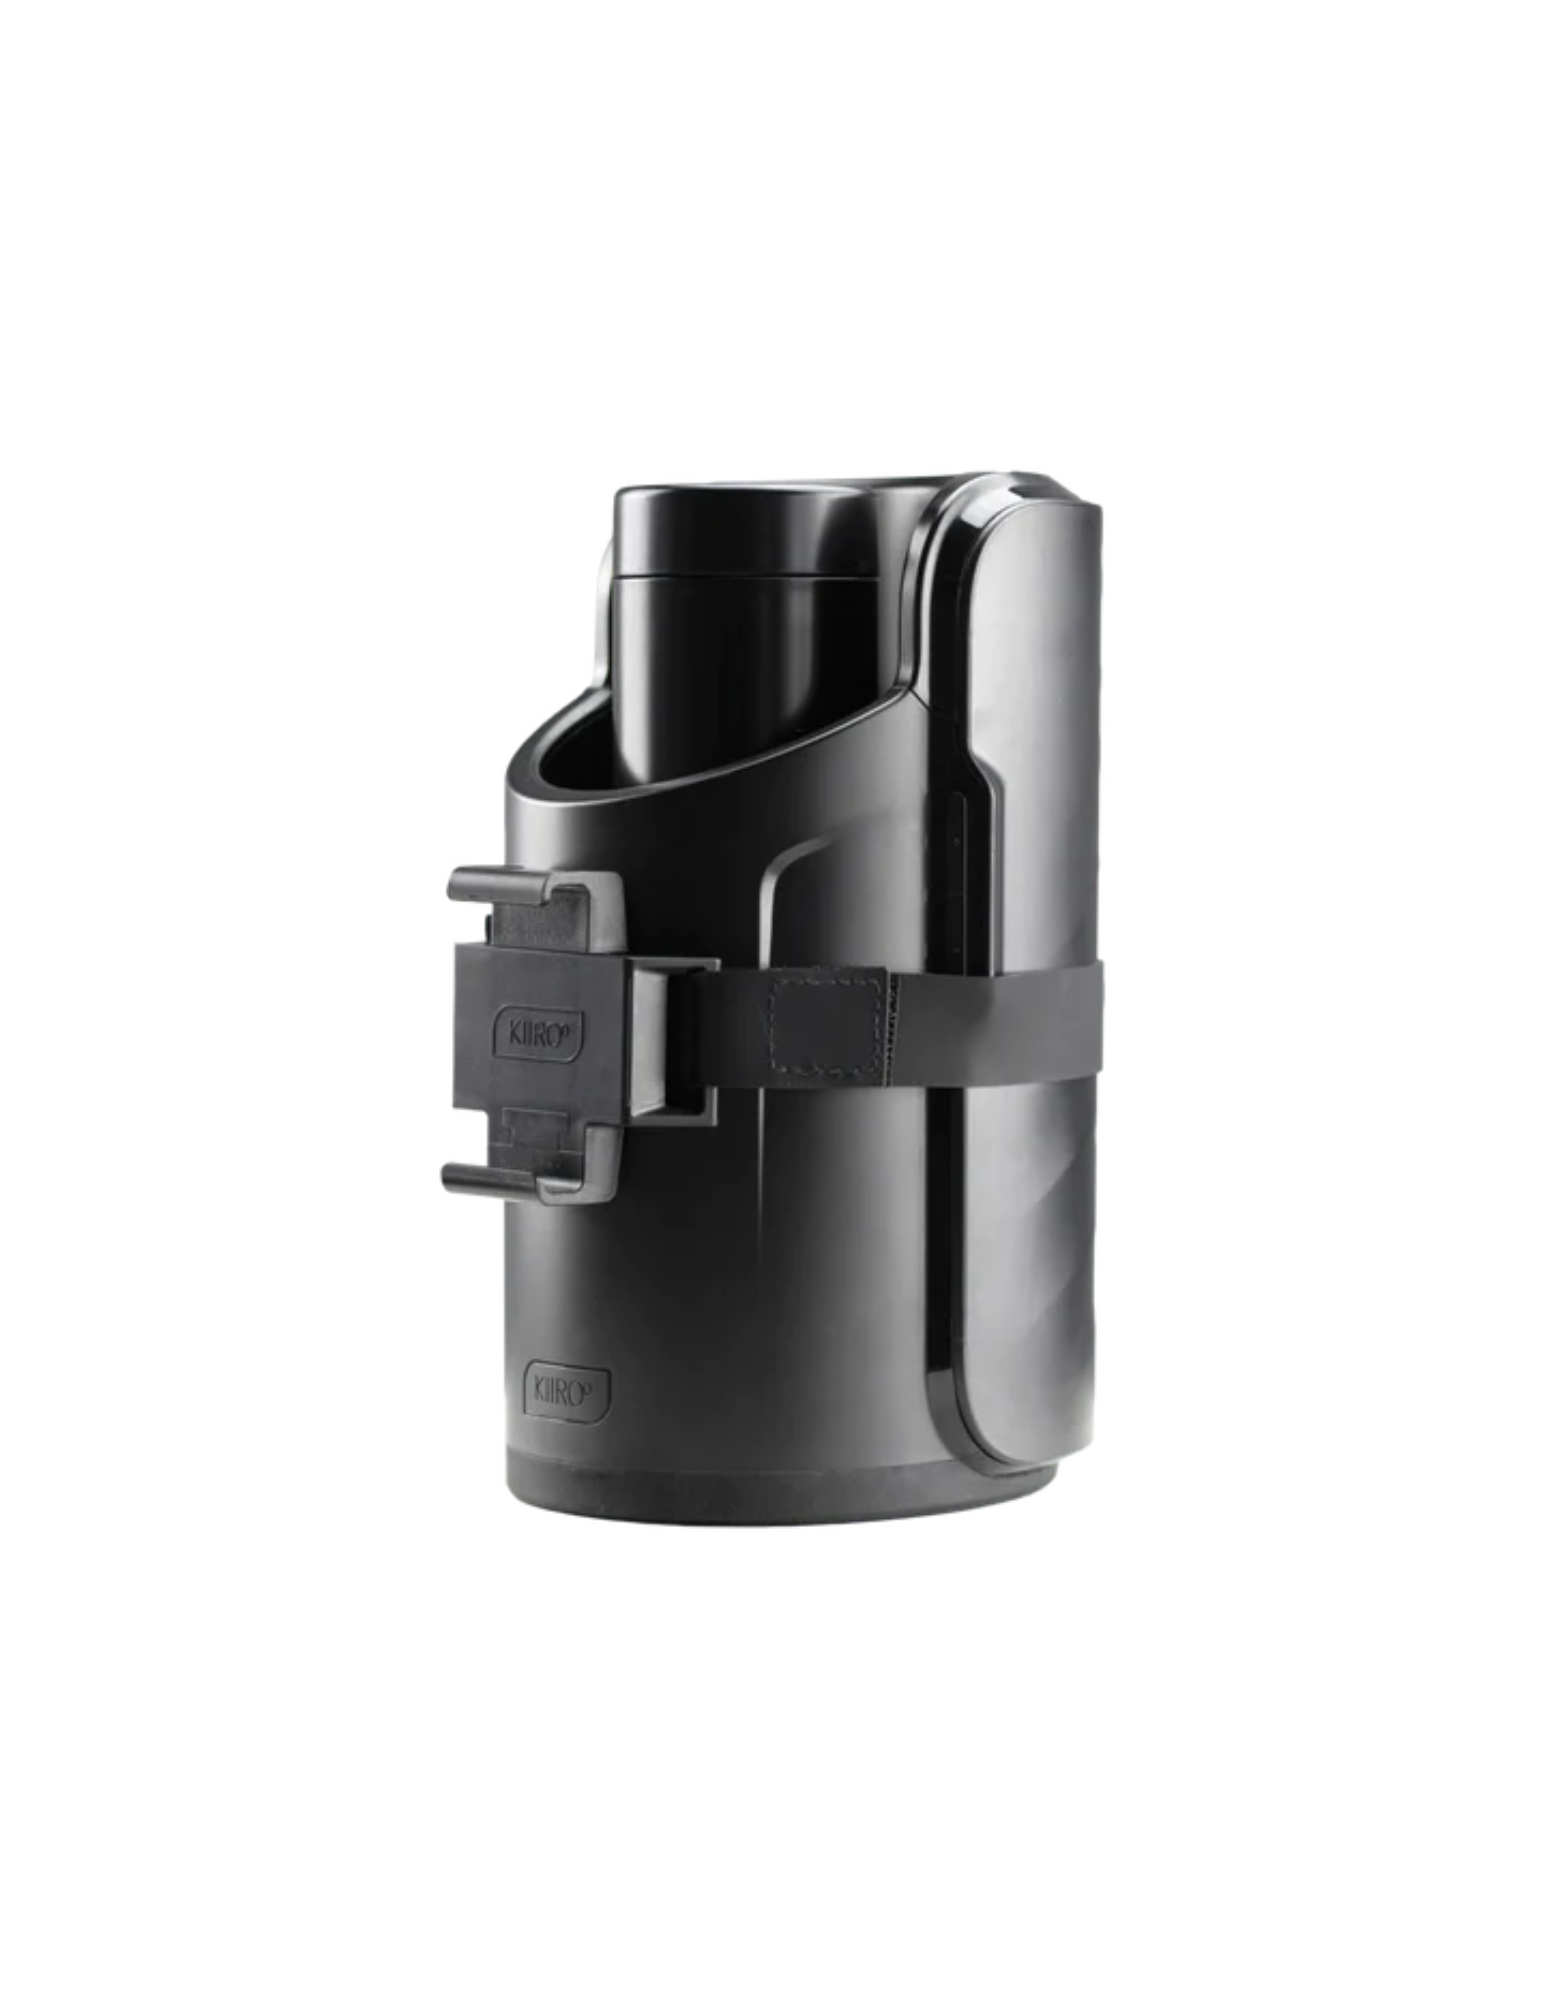 Front view of the Keon Accessory Phone Holder from KiiRoo shows the accessory without a phone.